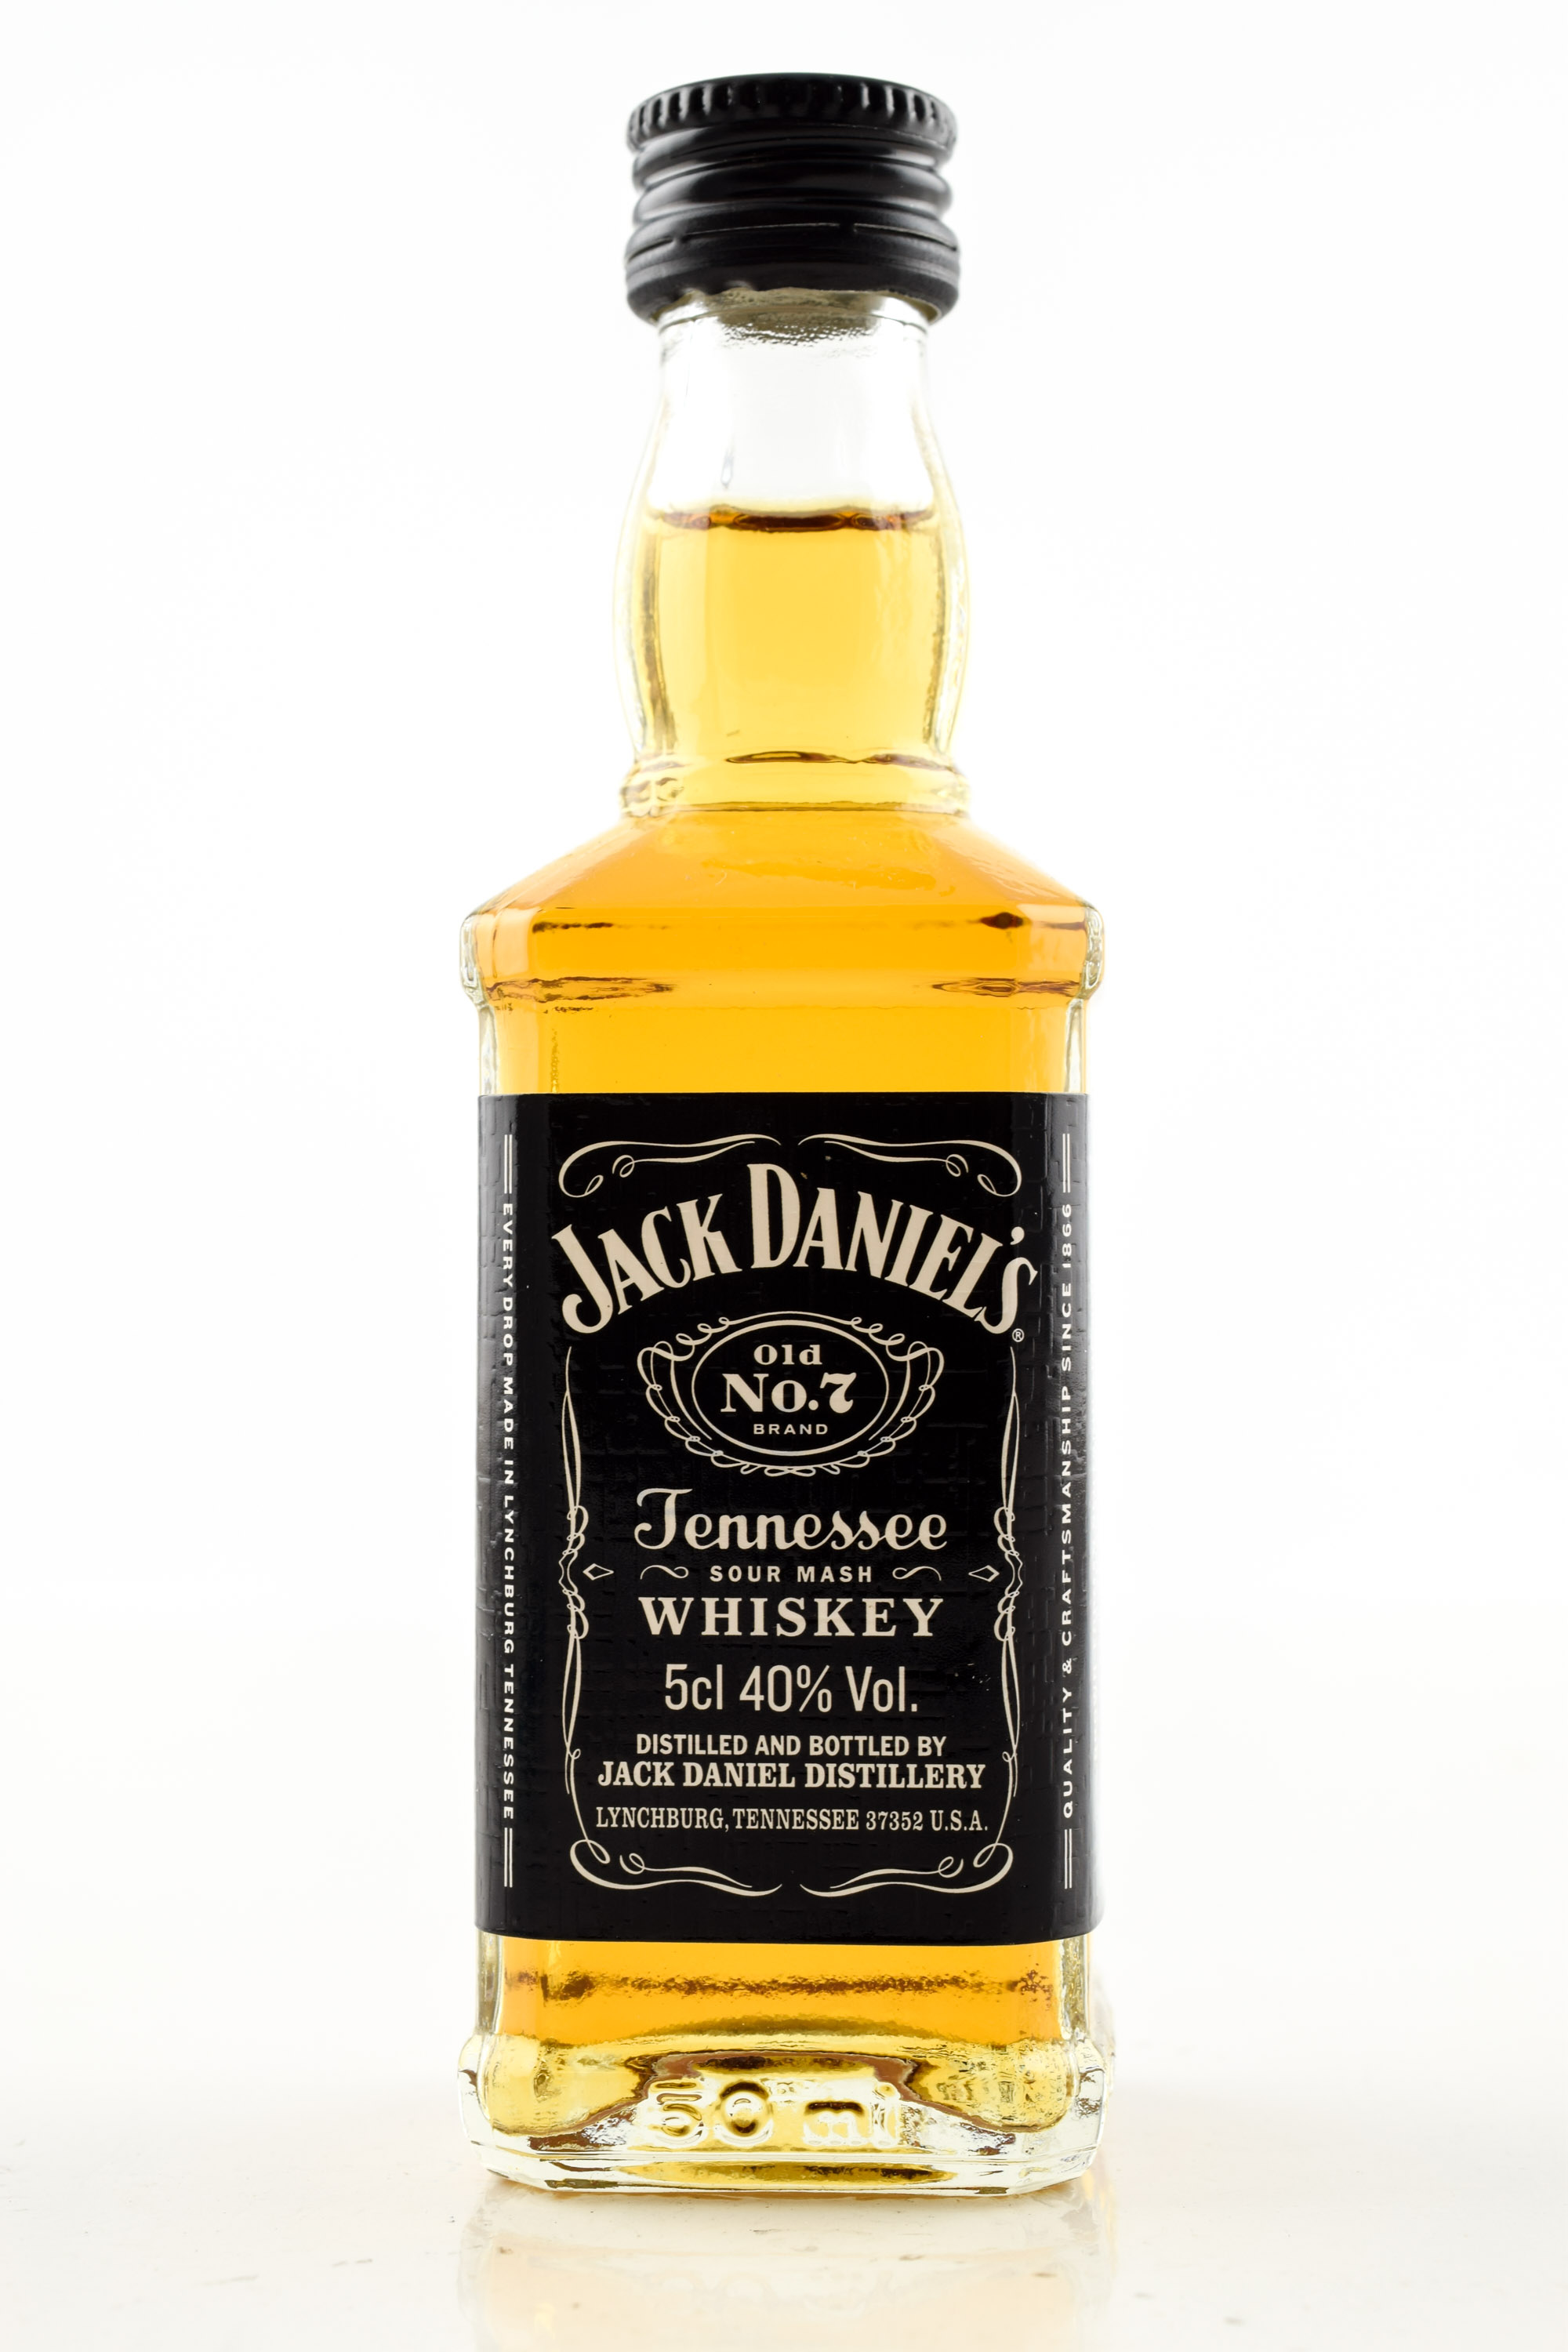 Whiskey now! of Home No. Tennessee - | of at Malts 4 Malts Daniel\'s 7 Jack explore Home >>